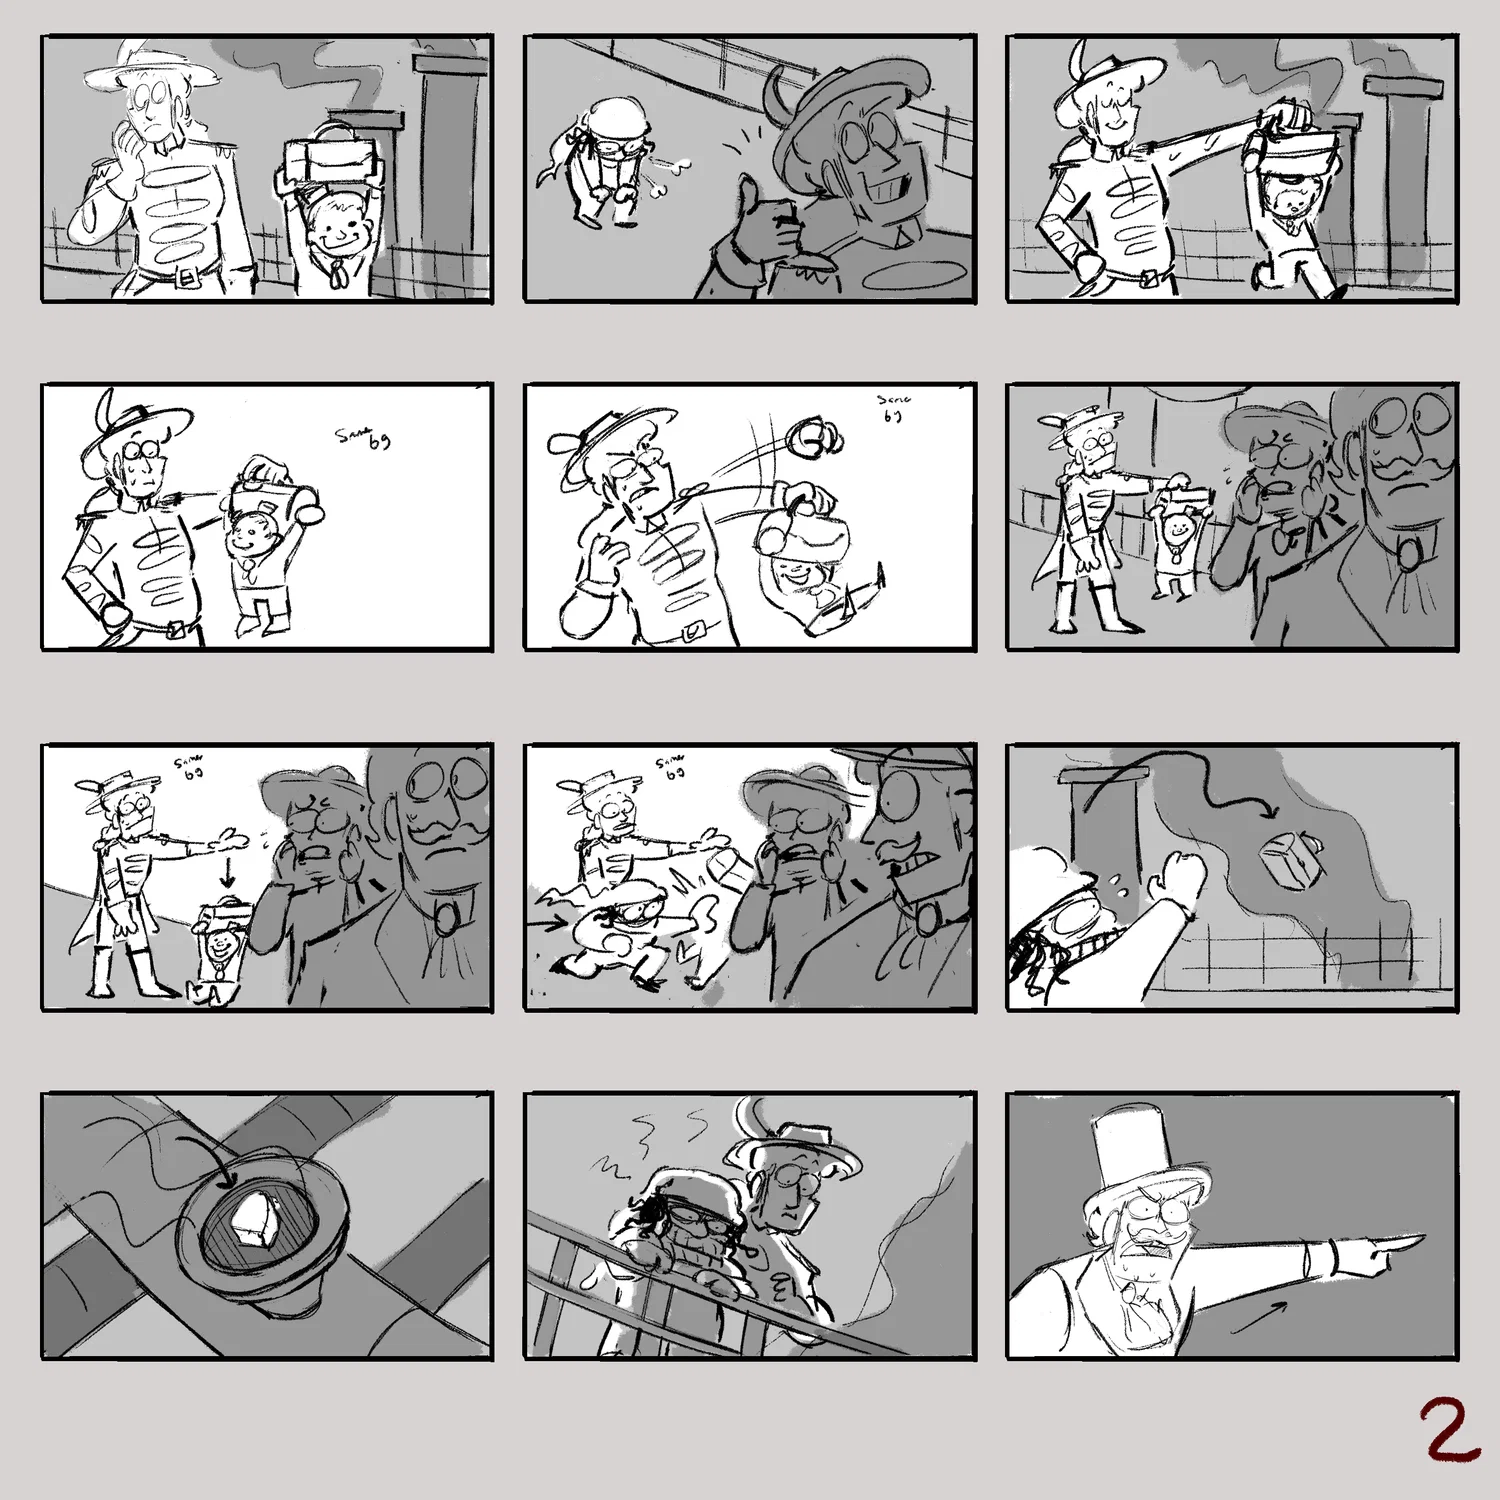 The second page of a storyboarded sequence, chaos starts to unfold in the factory as a worker's tool is dropped into a steam engine